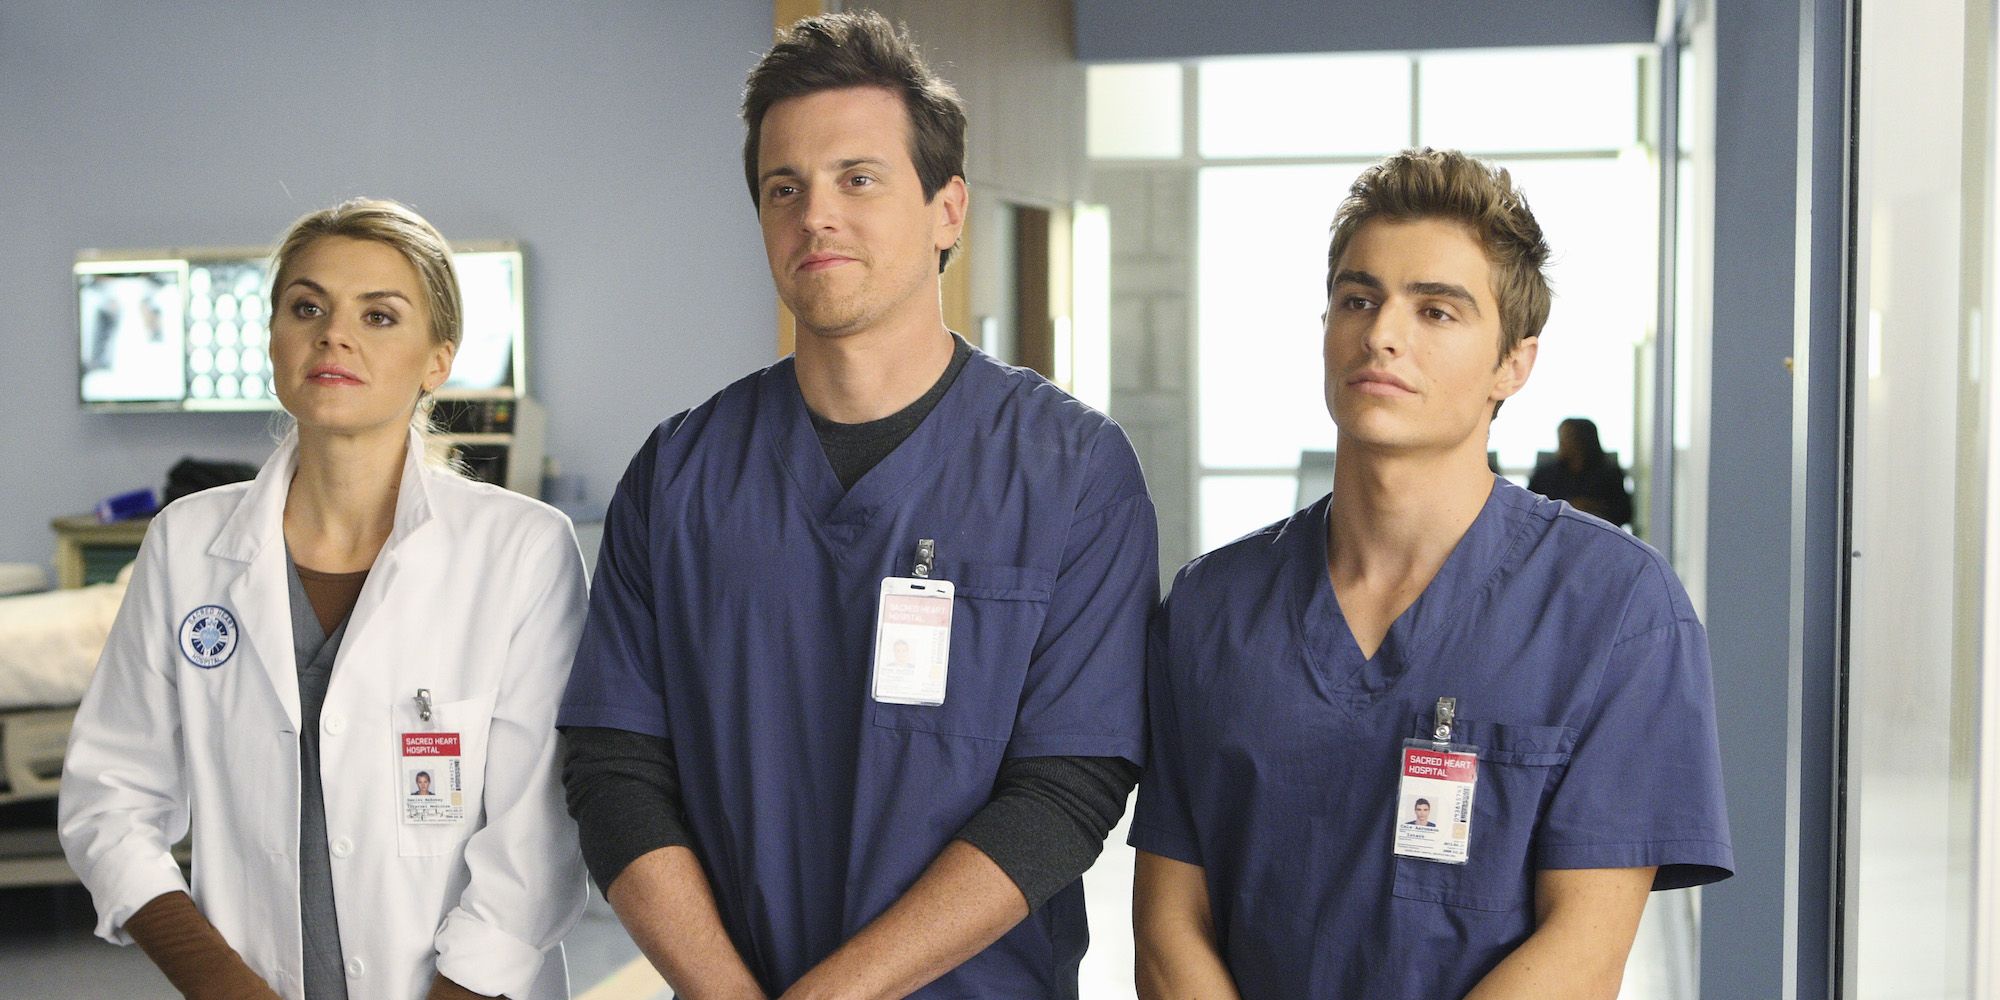 Three characters from Scrubs season 9 next to each other